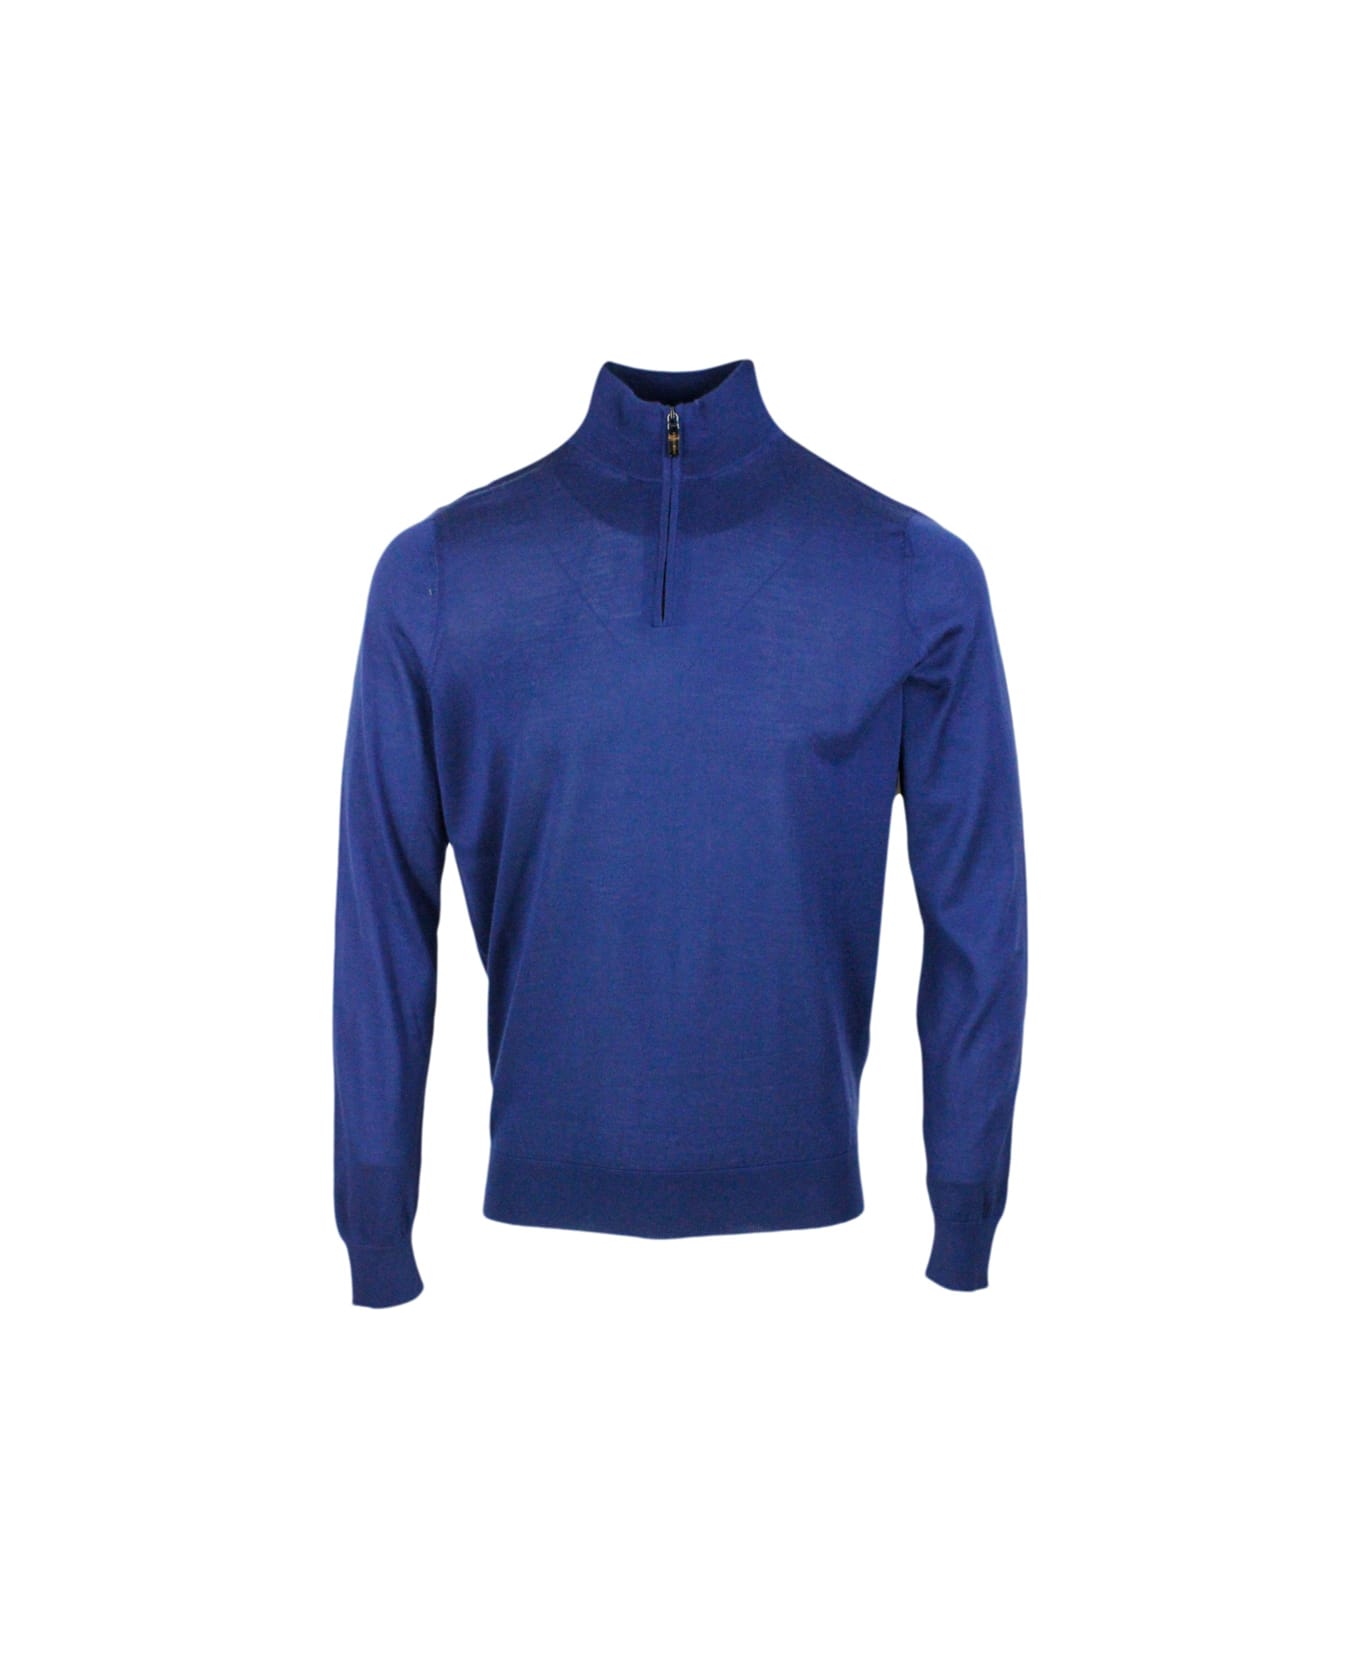 Colombo Light Half-zip Long-sleeved Sweater In Fine 100% Cashmere And Silk With Special Processing On The Profile Of The Neck - Blu royal トップス